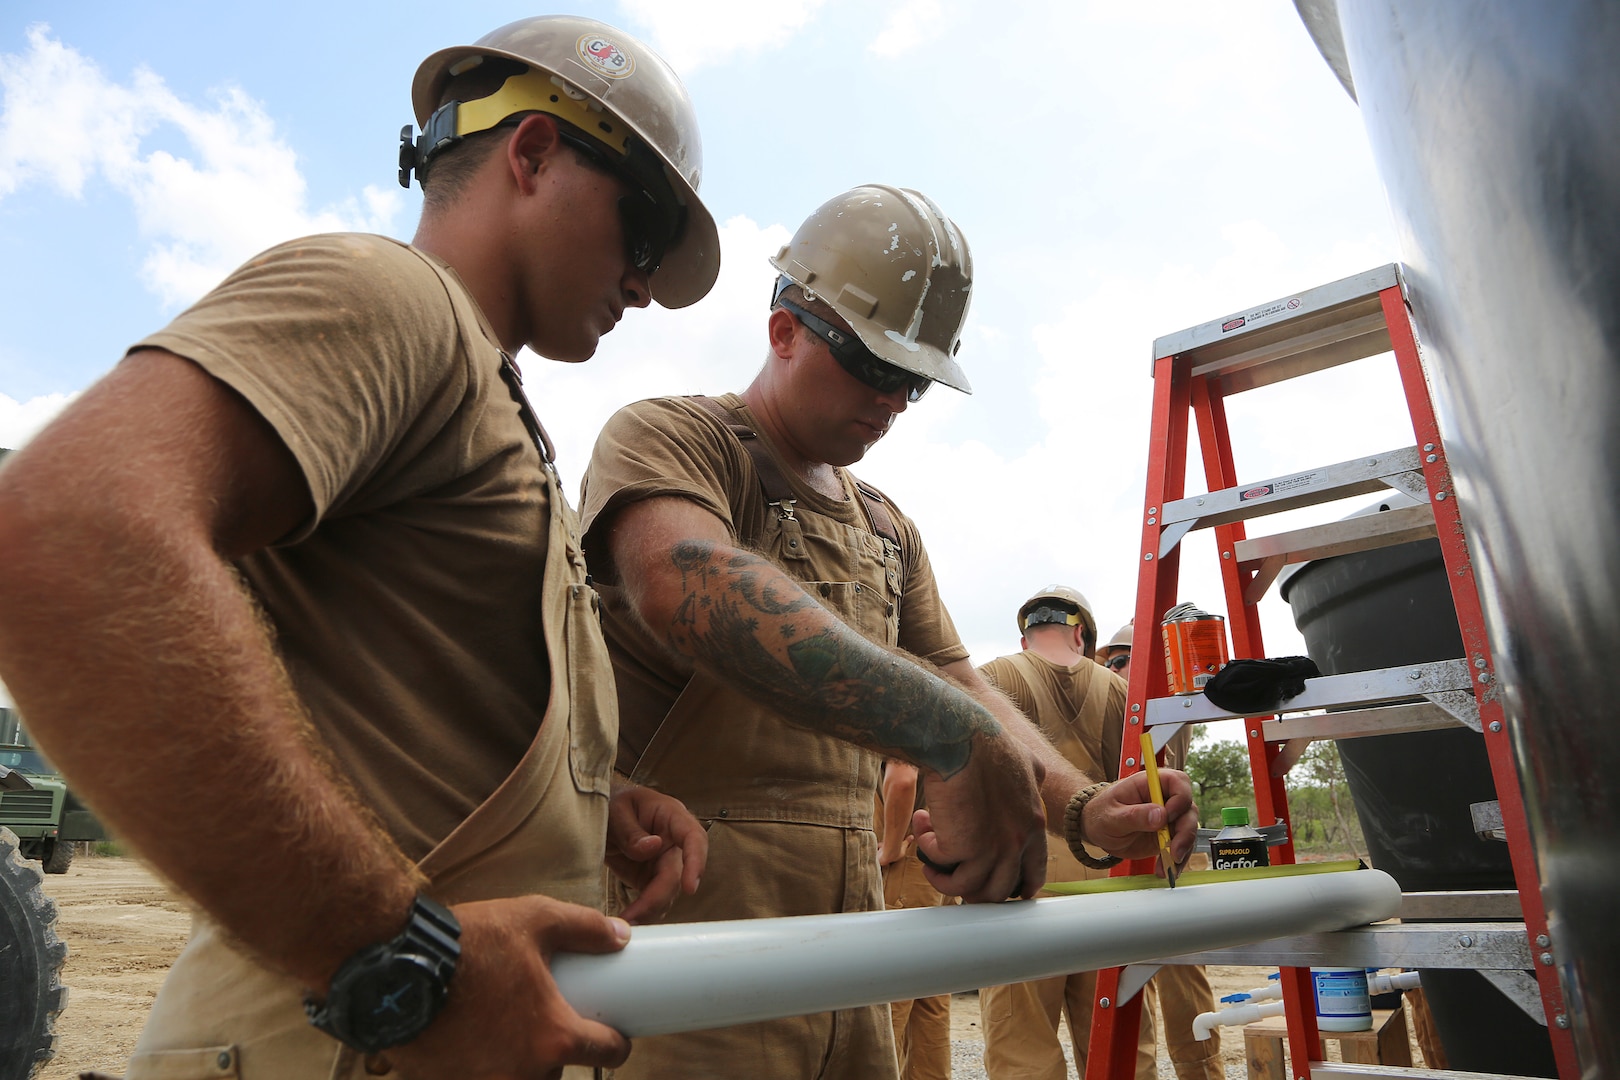 U.S. Navy Seabees mark the location of a plumbing fixture in Riohacha, Colombia, Sept. 27, 2018,